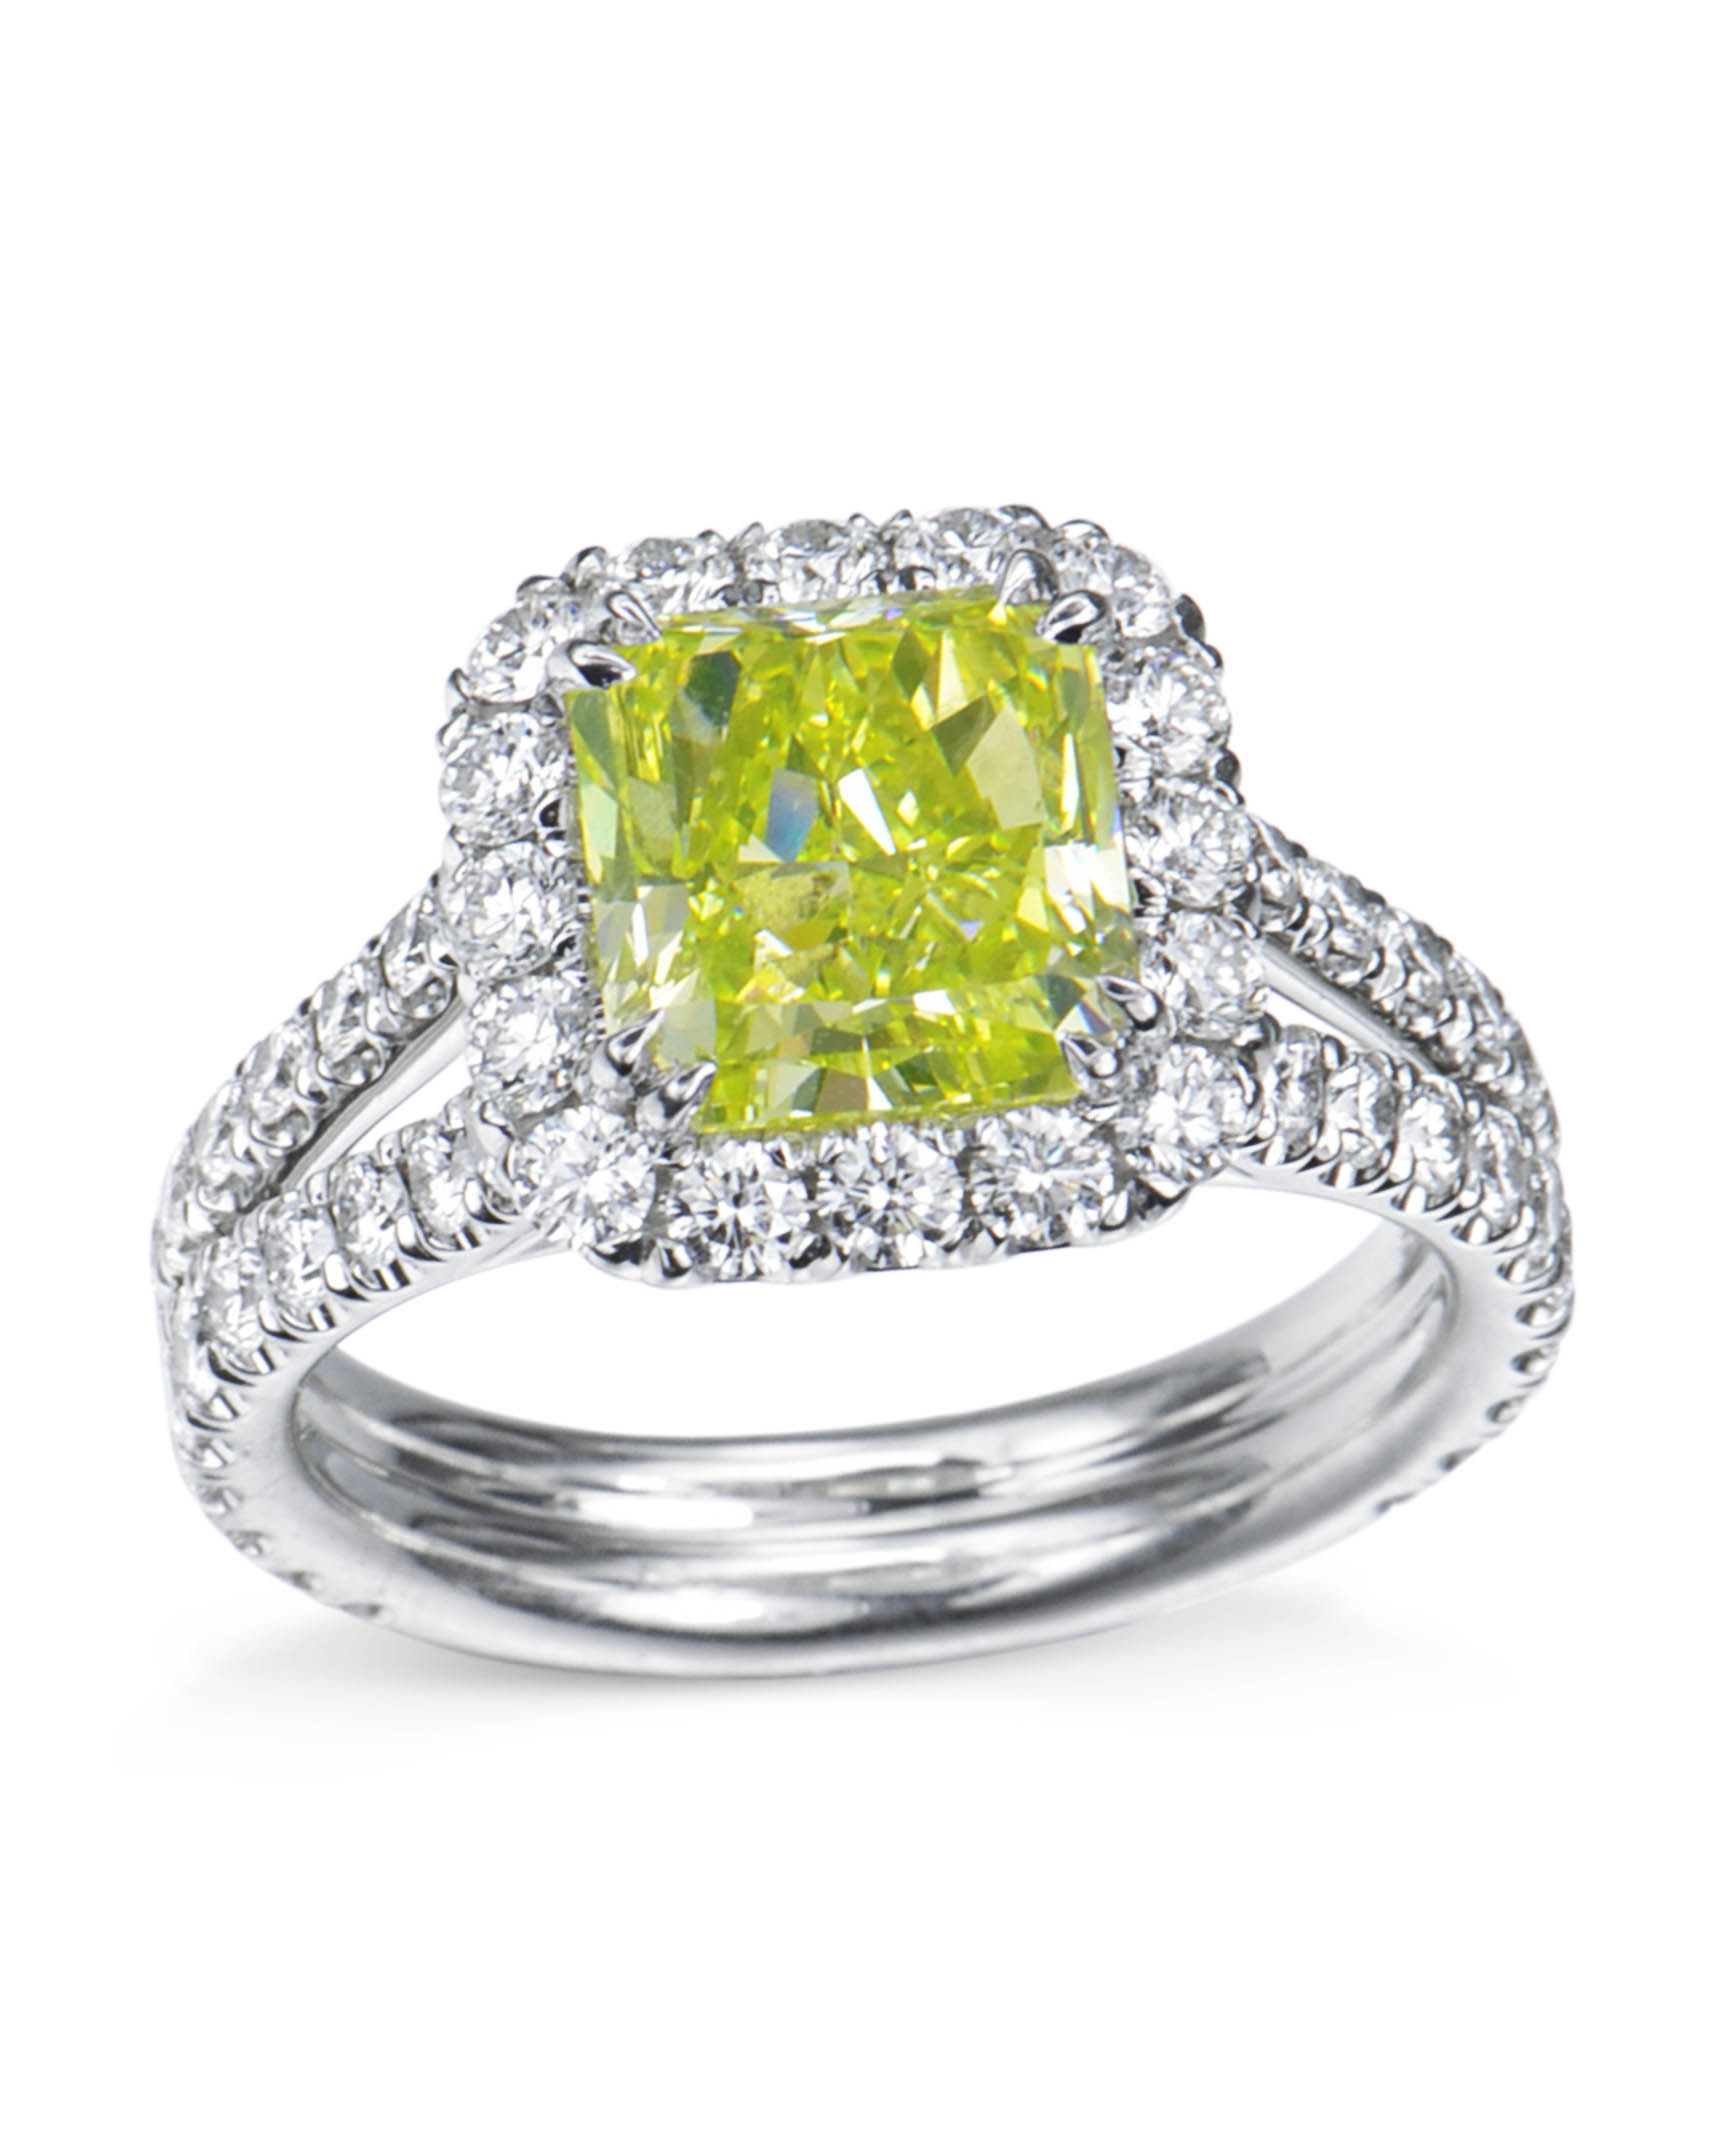 Buy ZOEY Green American Diamond Cocktail Ring for Girls & Women at Amazon.in